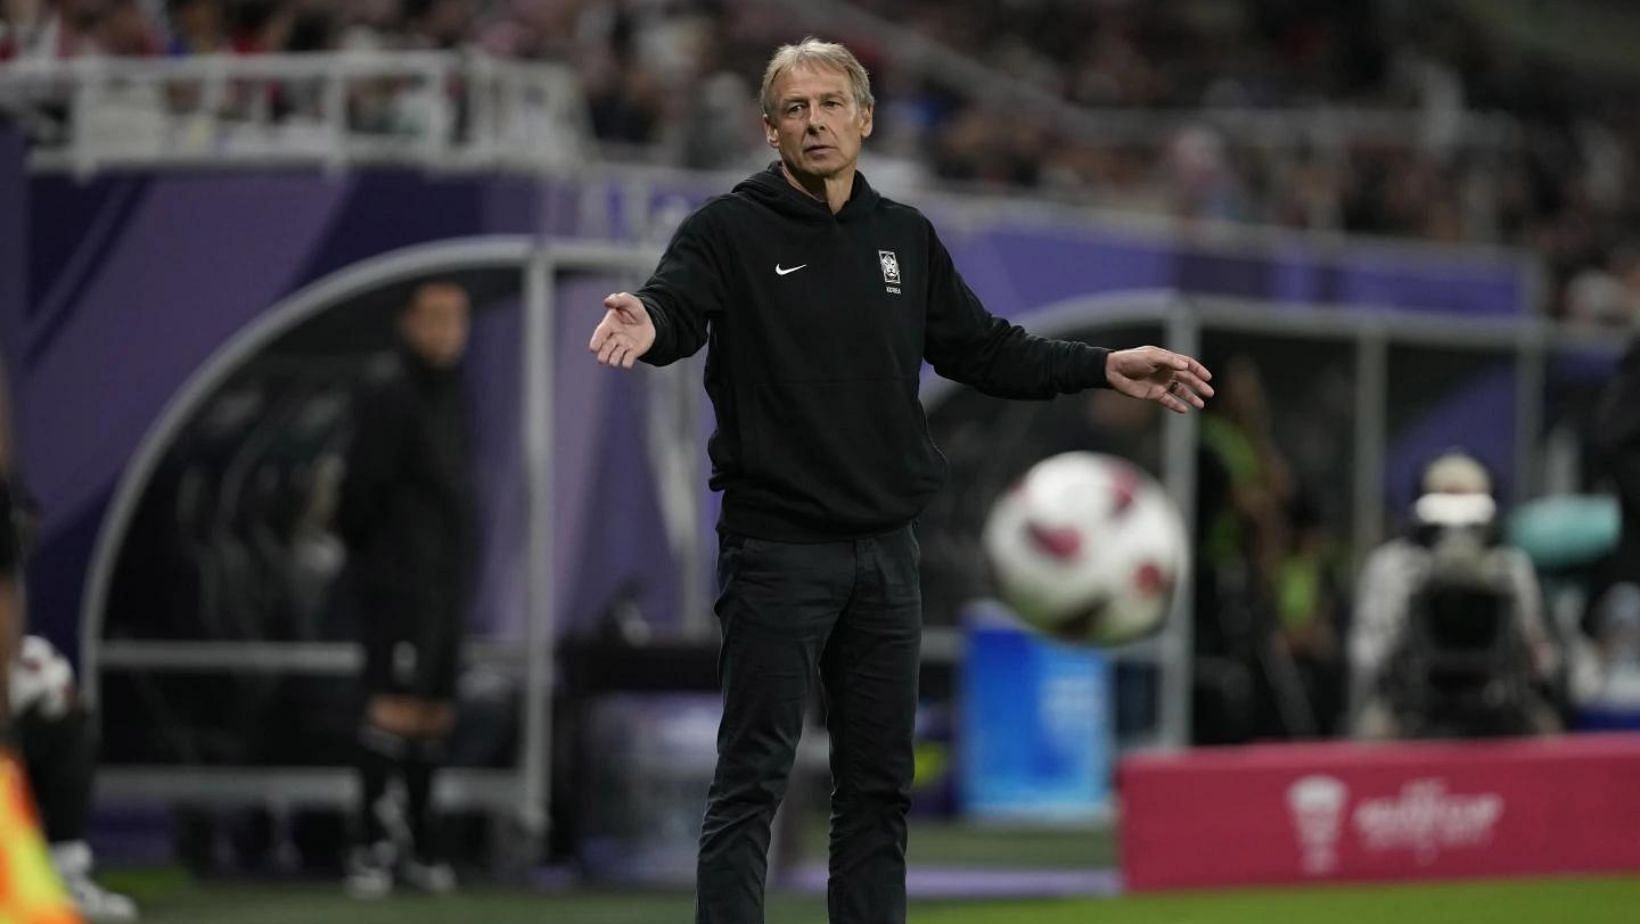 Jurgen Klinsmann allegedly refuses to live at Paju National Football Center due to its proximity to North Korea. (Image via X/@SnowBuffering)